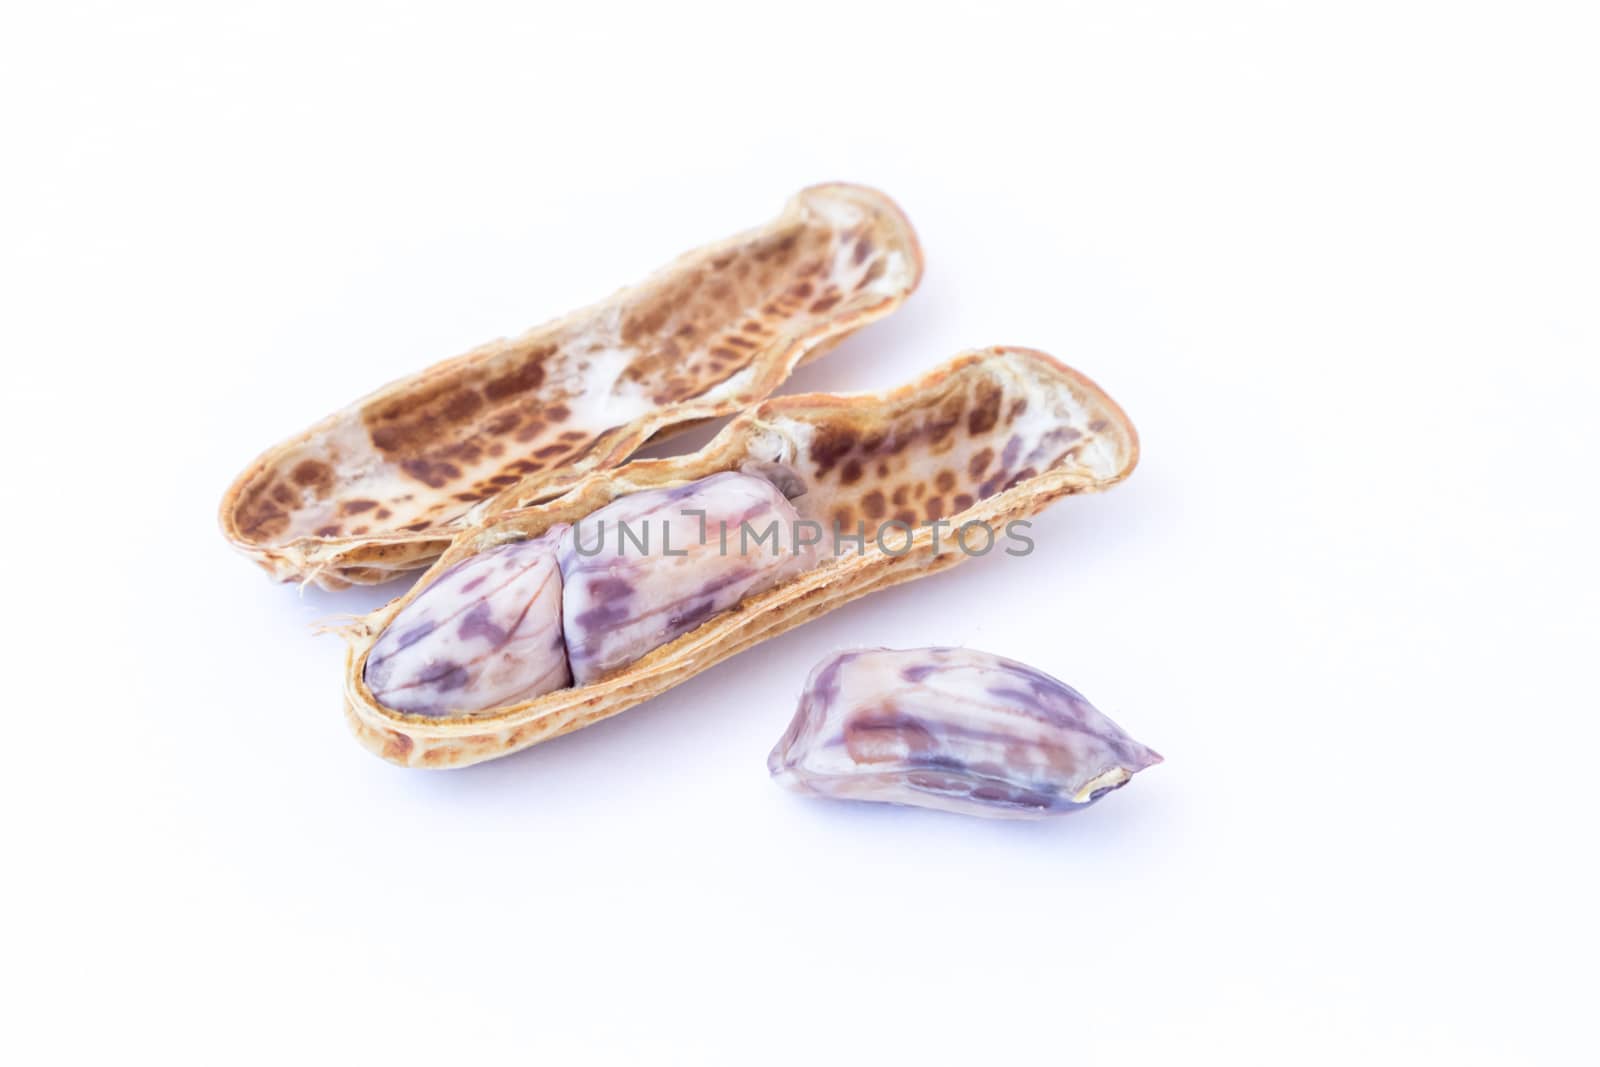 Boiled peanuts or groundnuts on white background